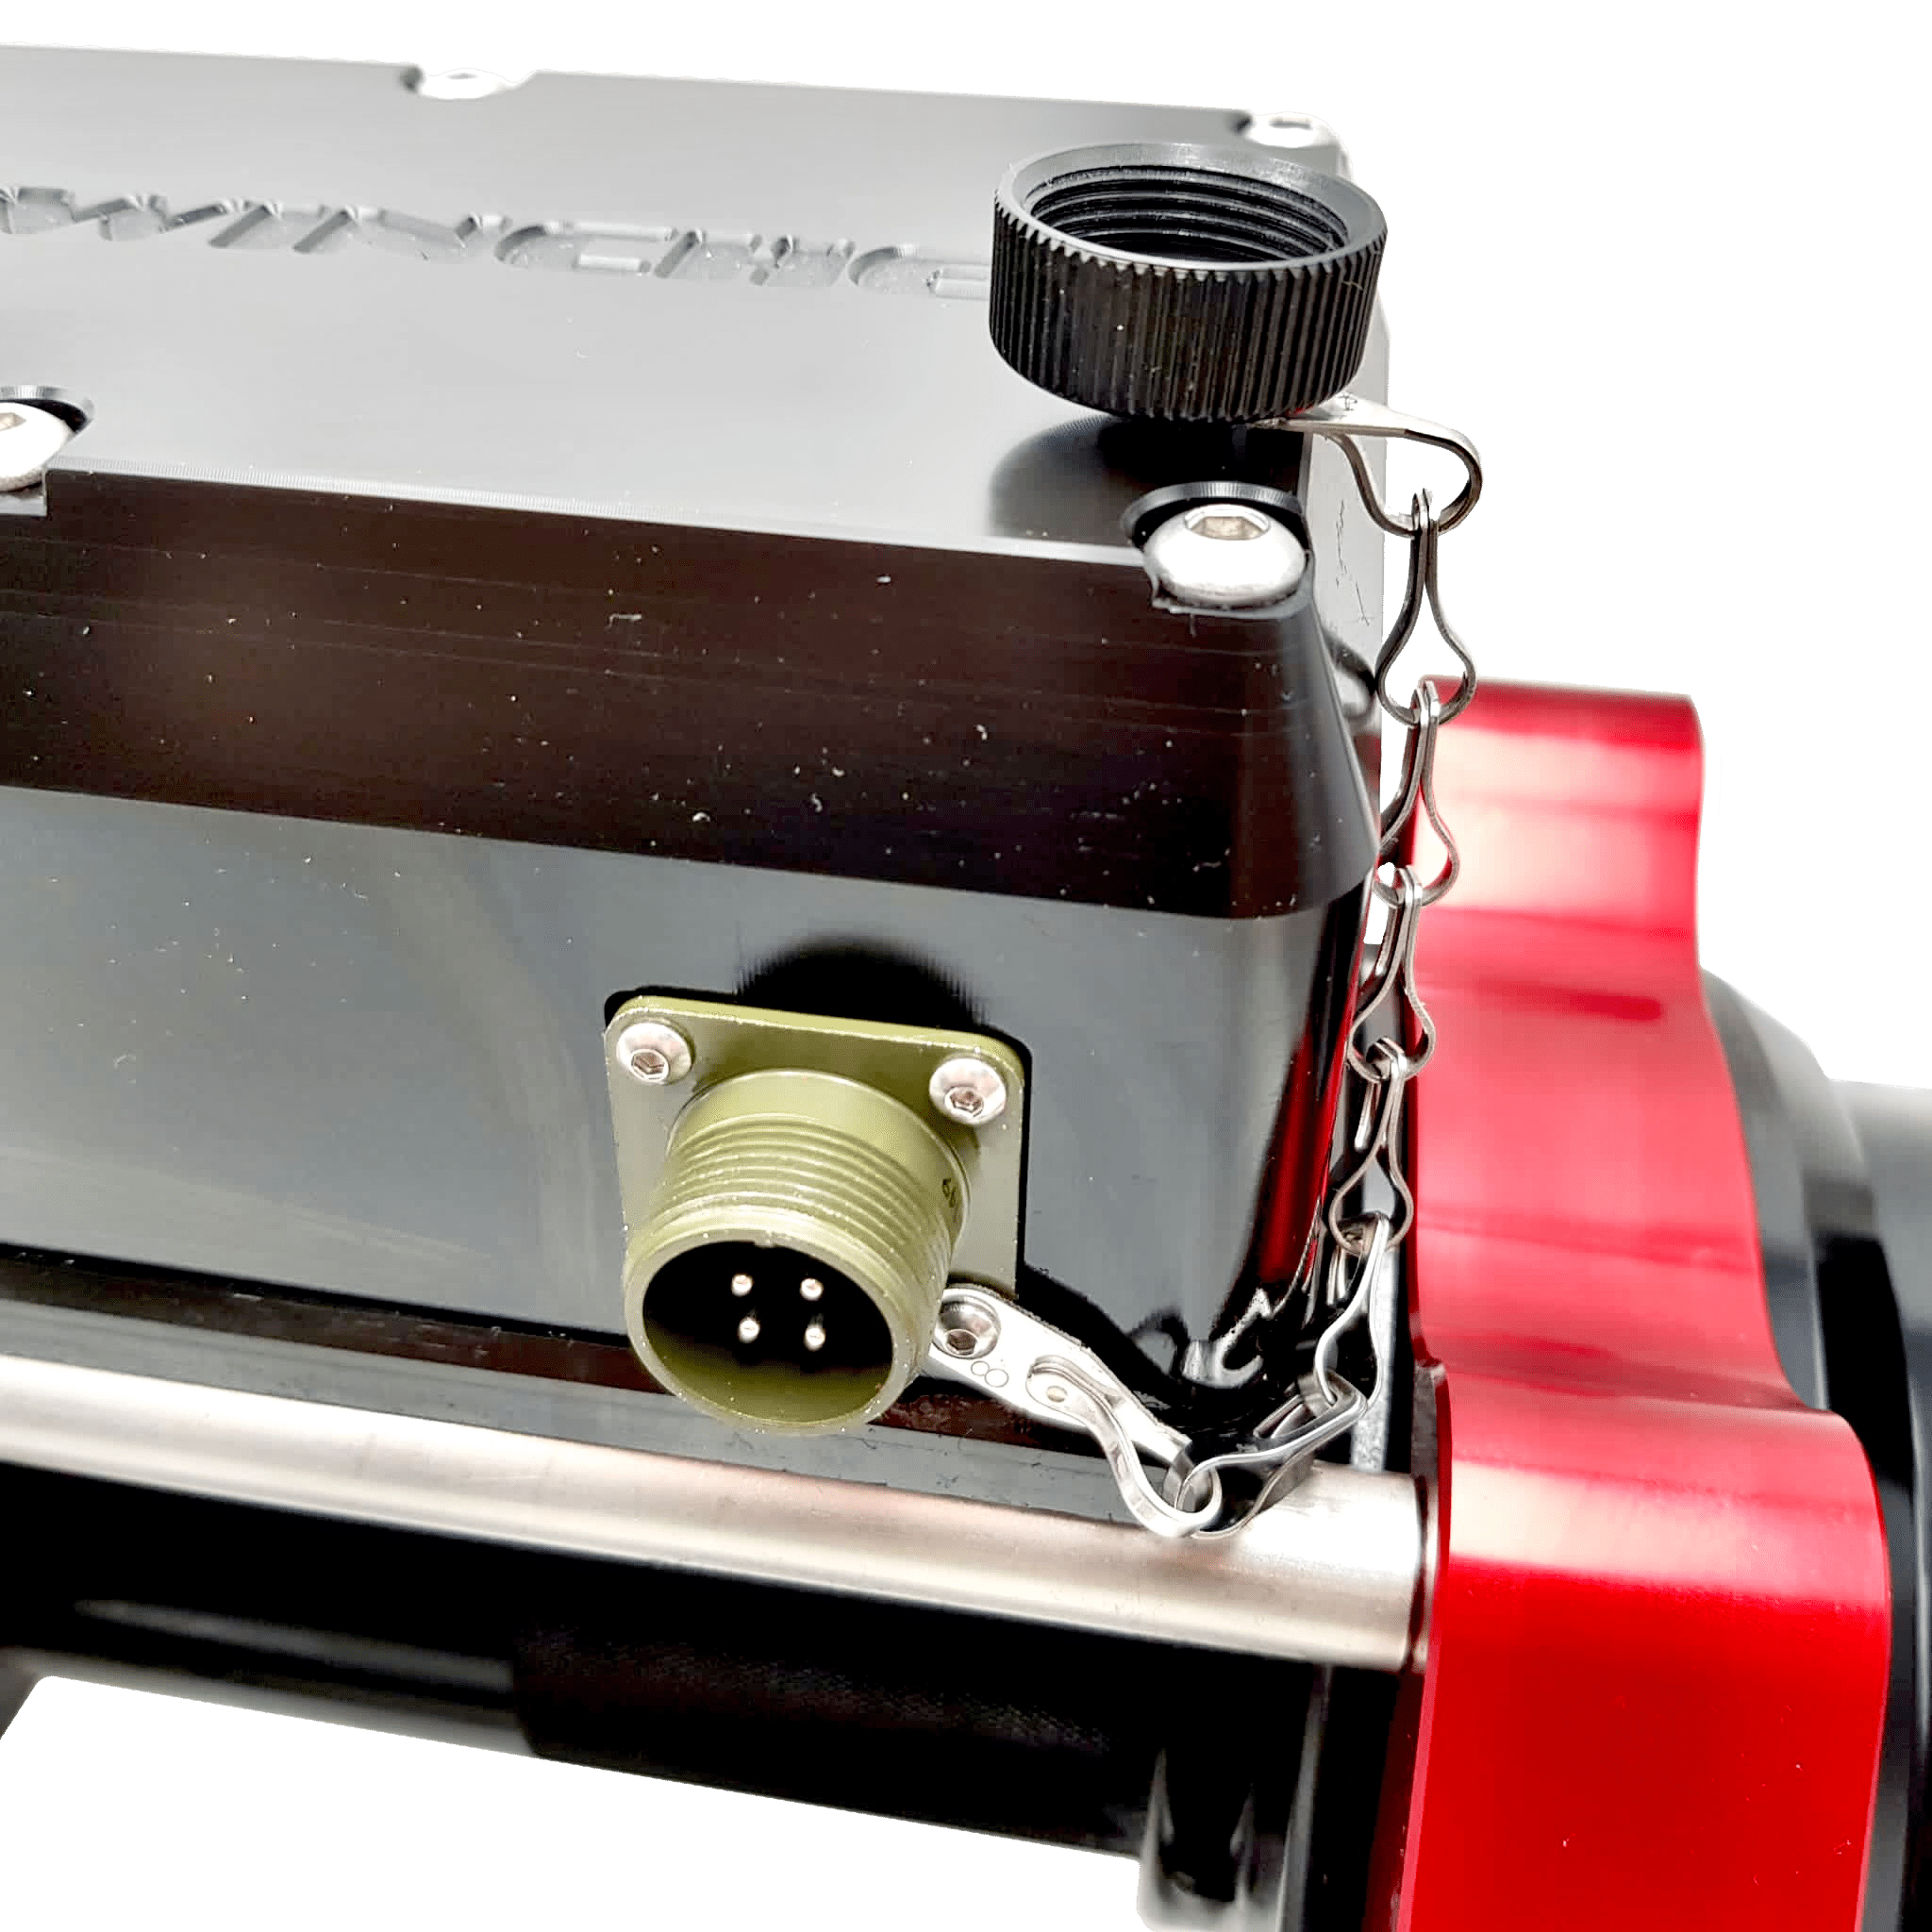 DR. NANO Off-Road Winch, For Pulling, Capacity: 12,000 LBS at Rs